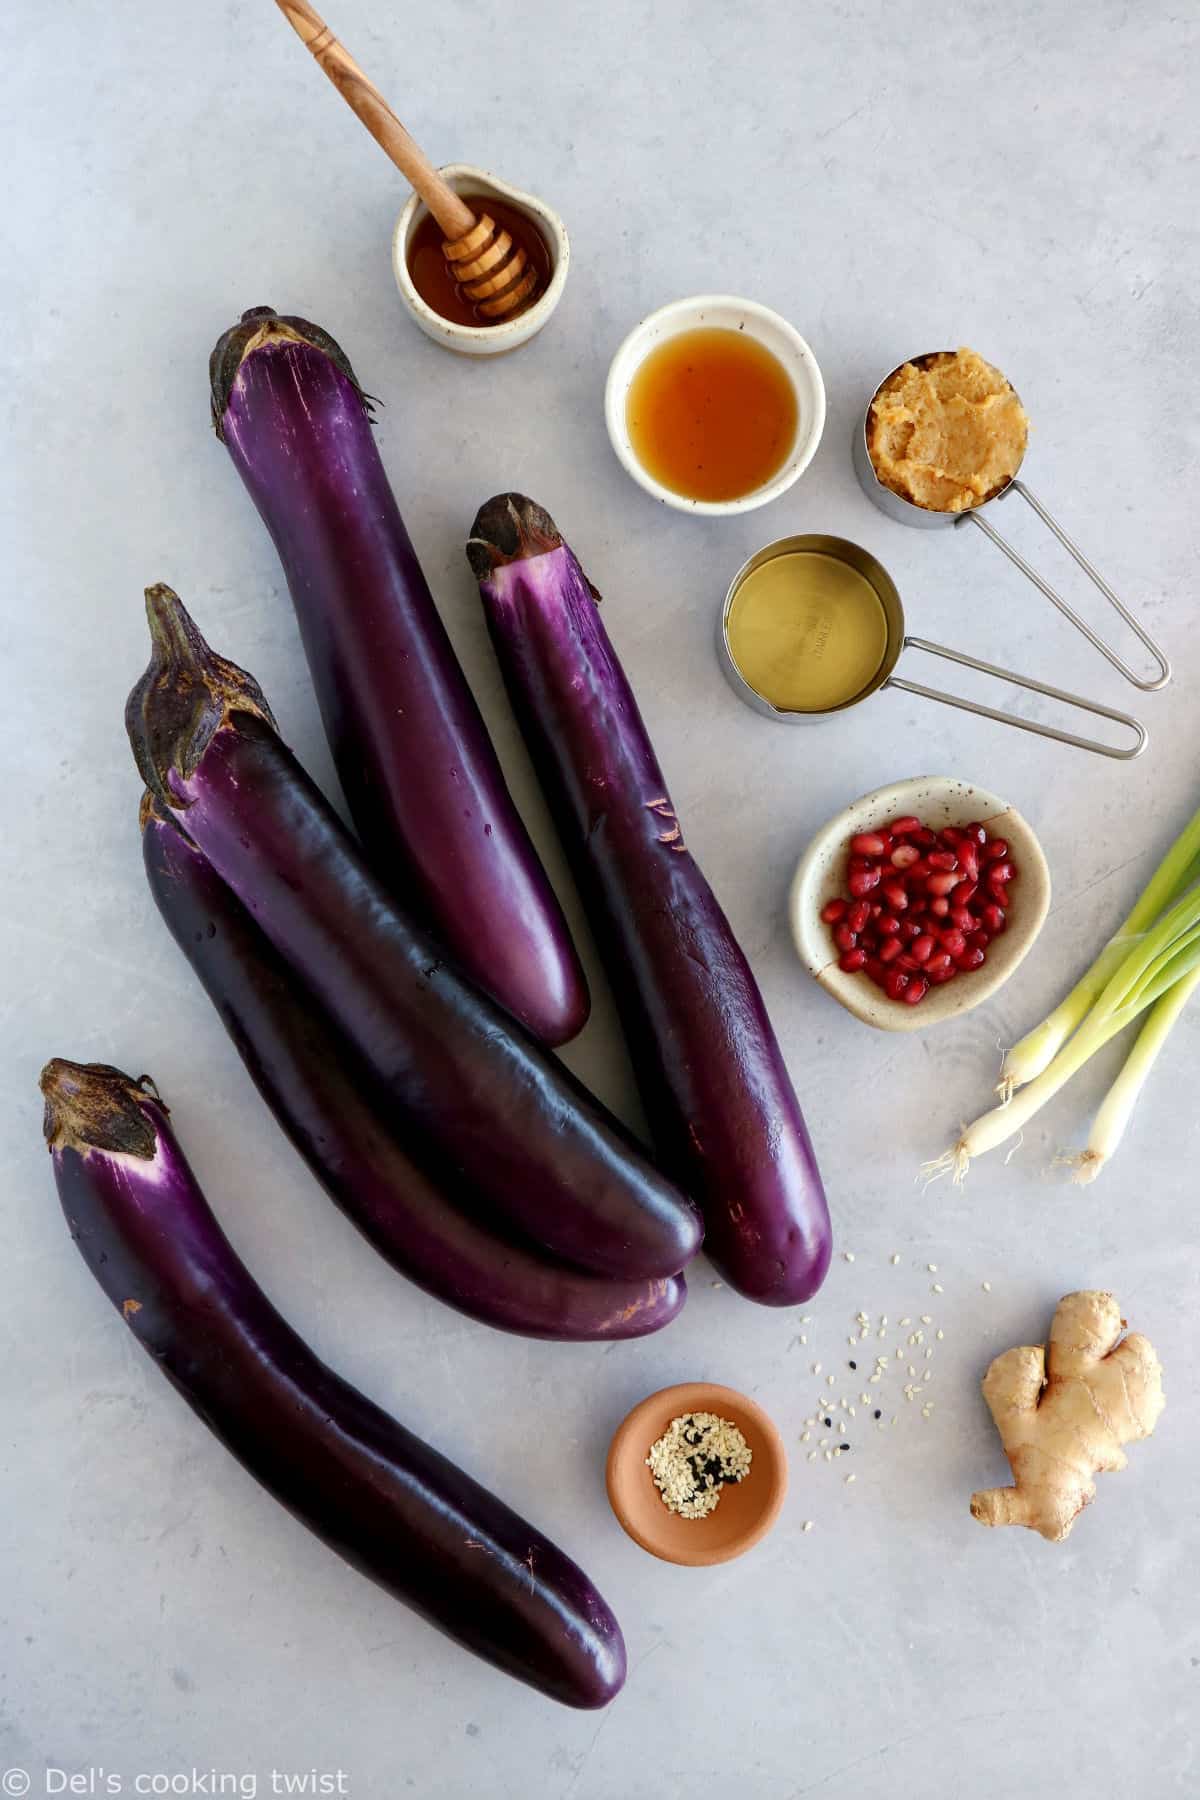 Miso-glazed Japanese eggplant (Nasu Dengaku) is a traditional Japanese side dish, loaded with umami flavors. Ready within 30 minutes, this easy recipe yields some delicious tender eggplant slices, caramelized with a sweet and salty miso glaze.